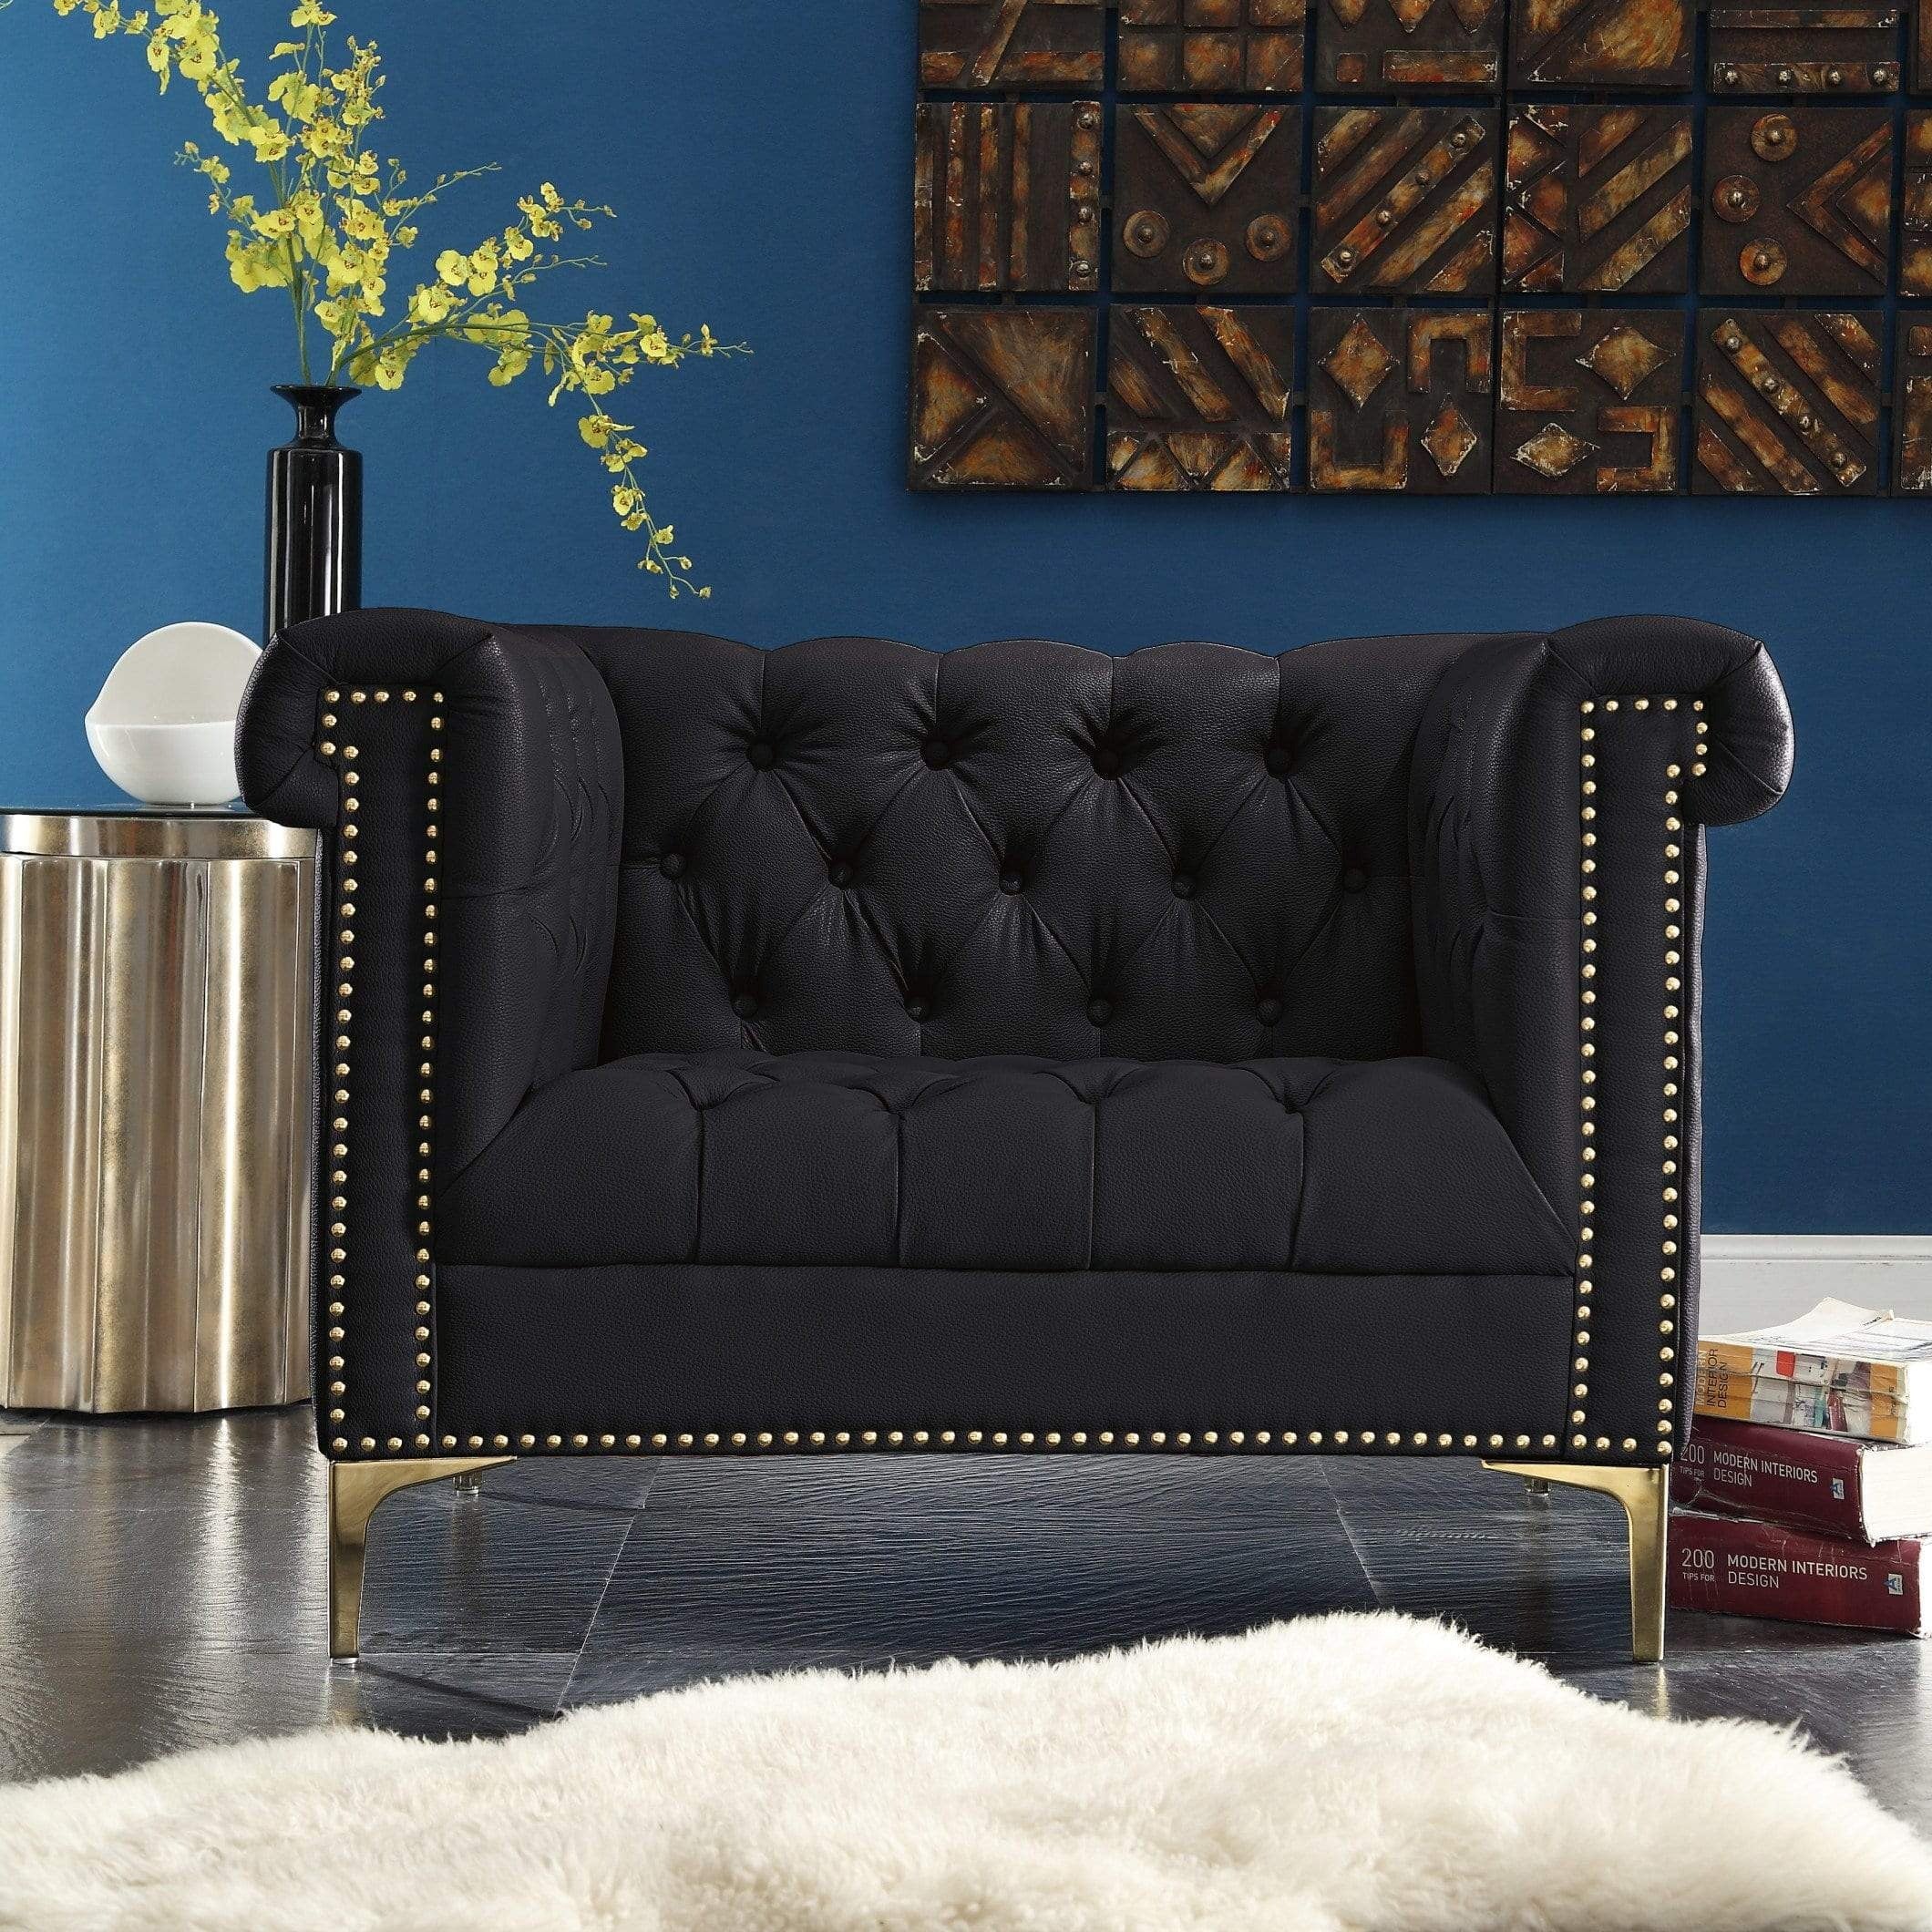 Patton Tufted Faux Leather Club Chair